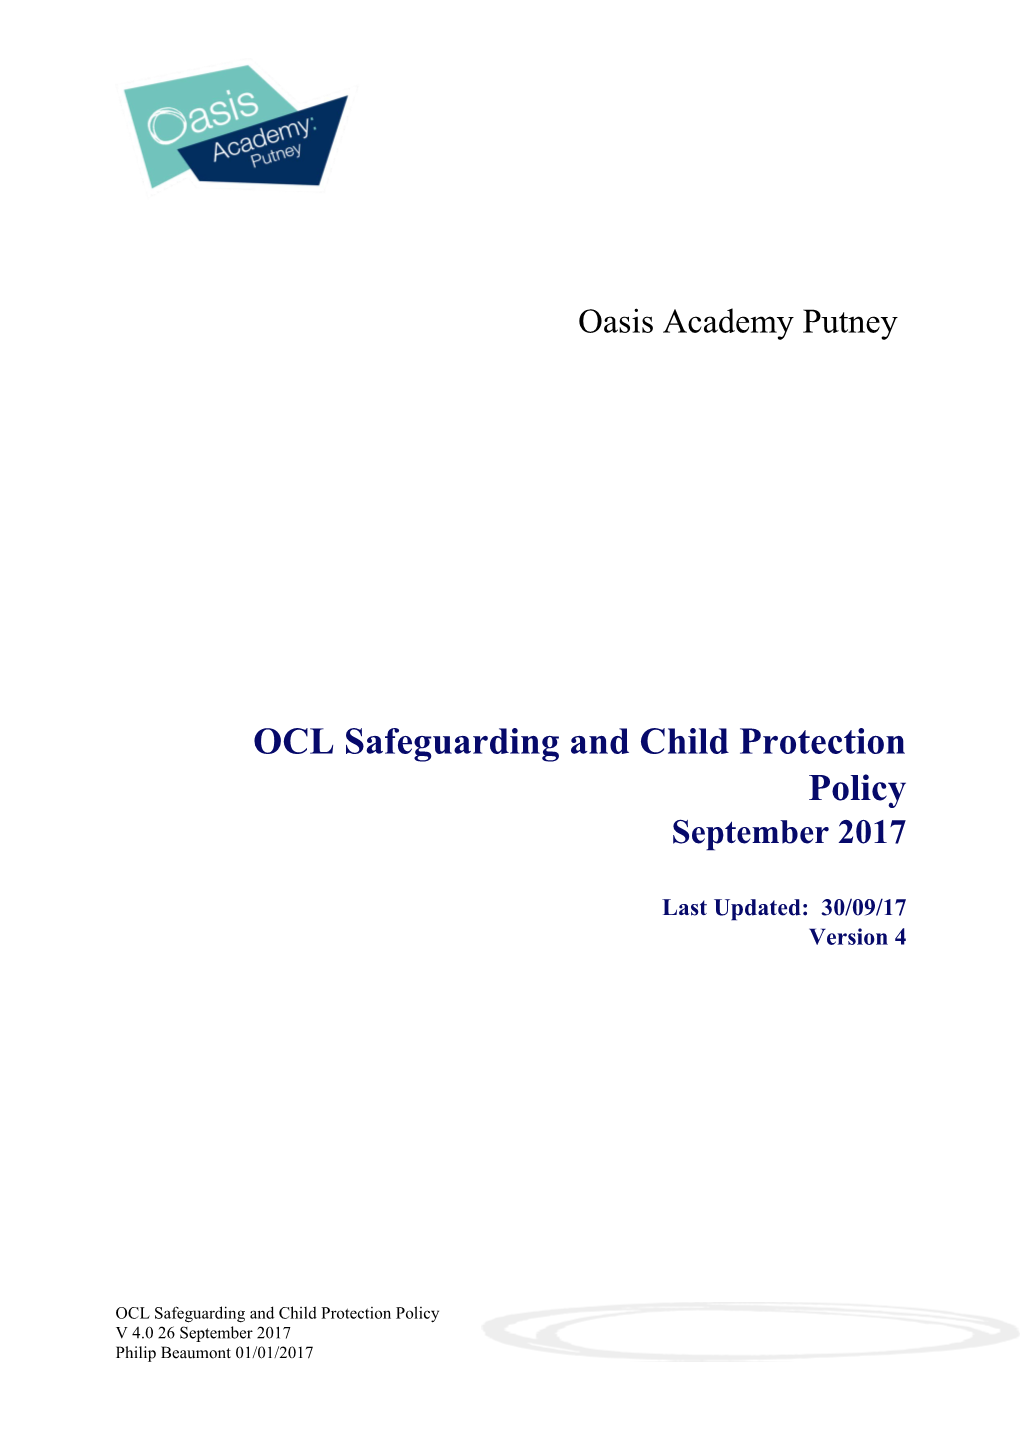 OCL Safeguarding and Child Protection Policy